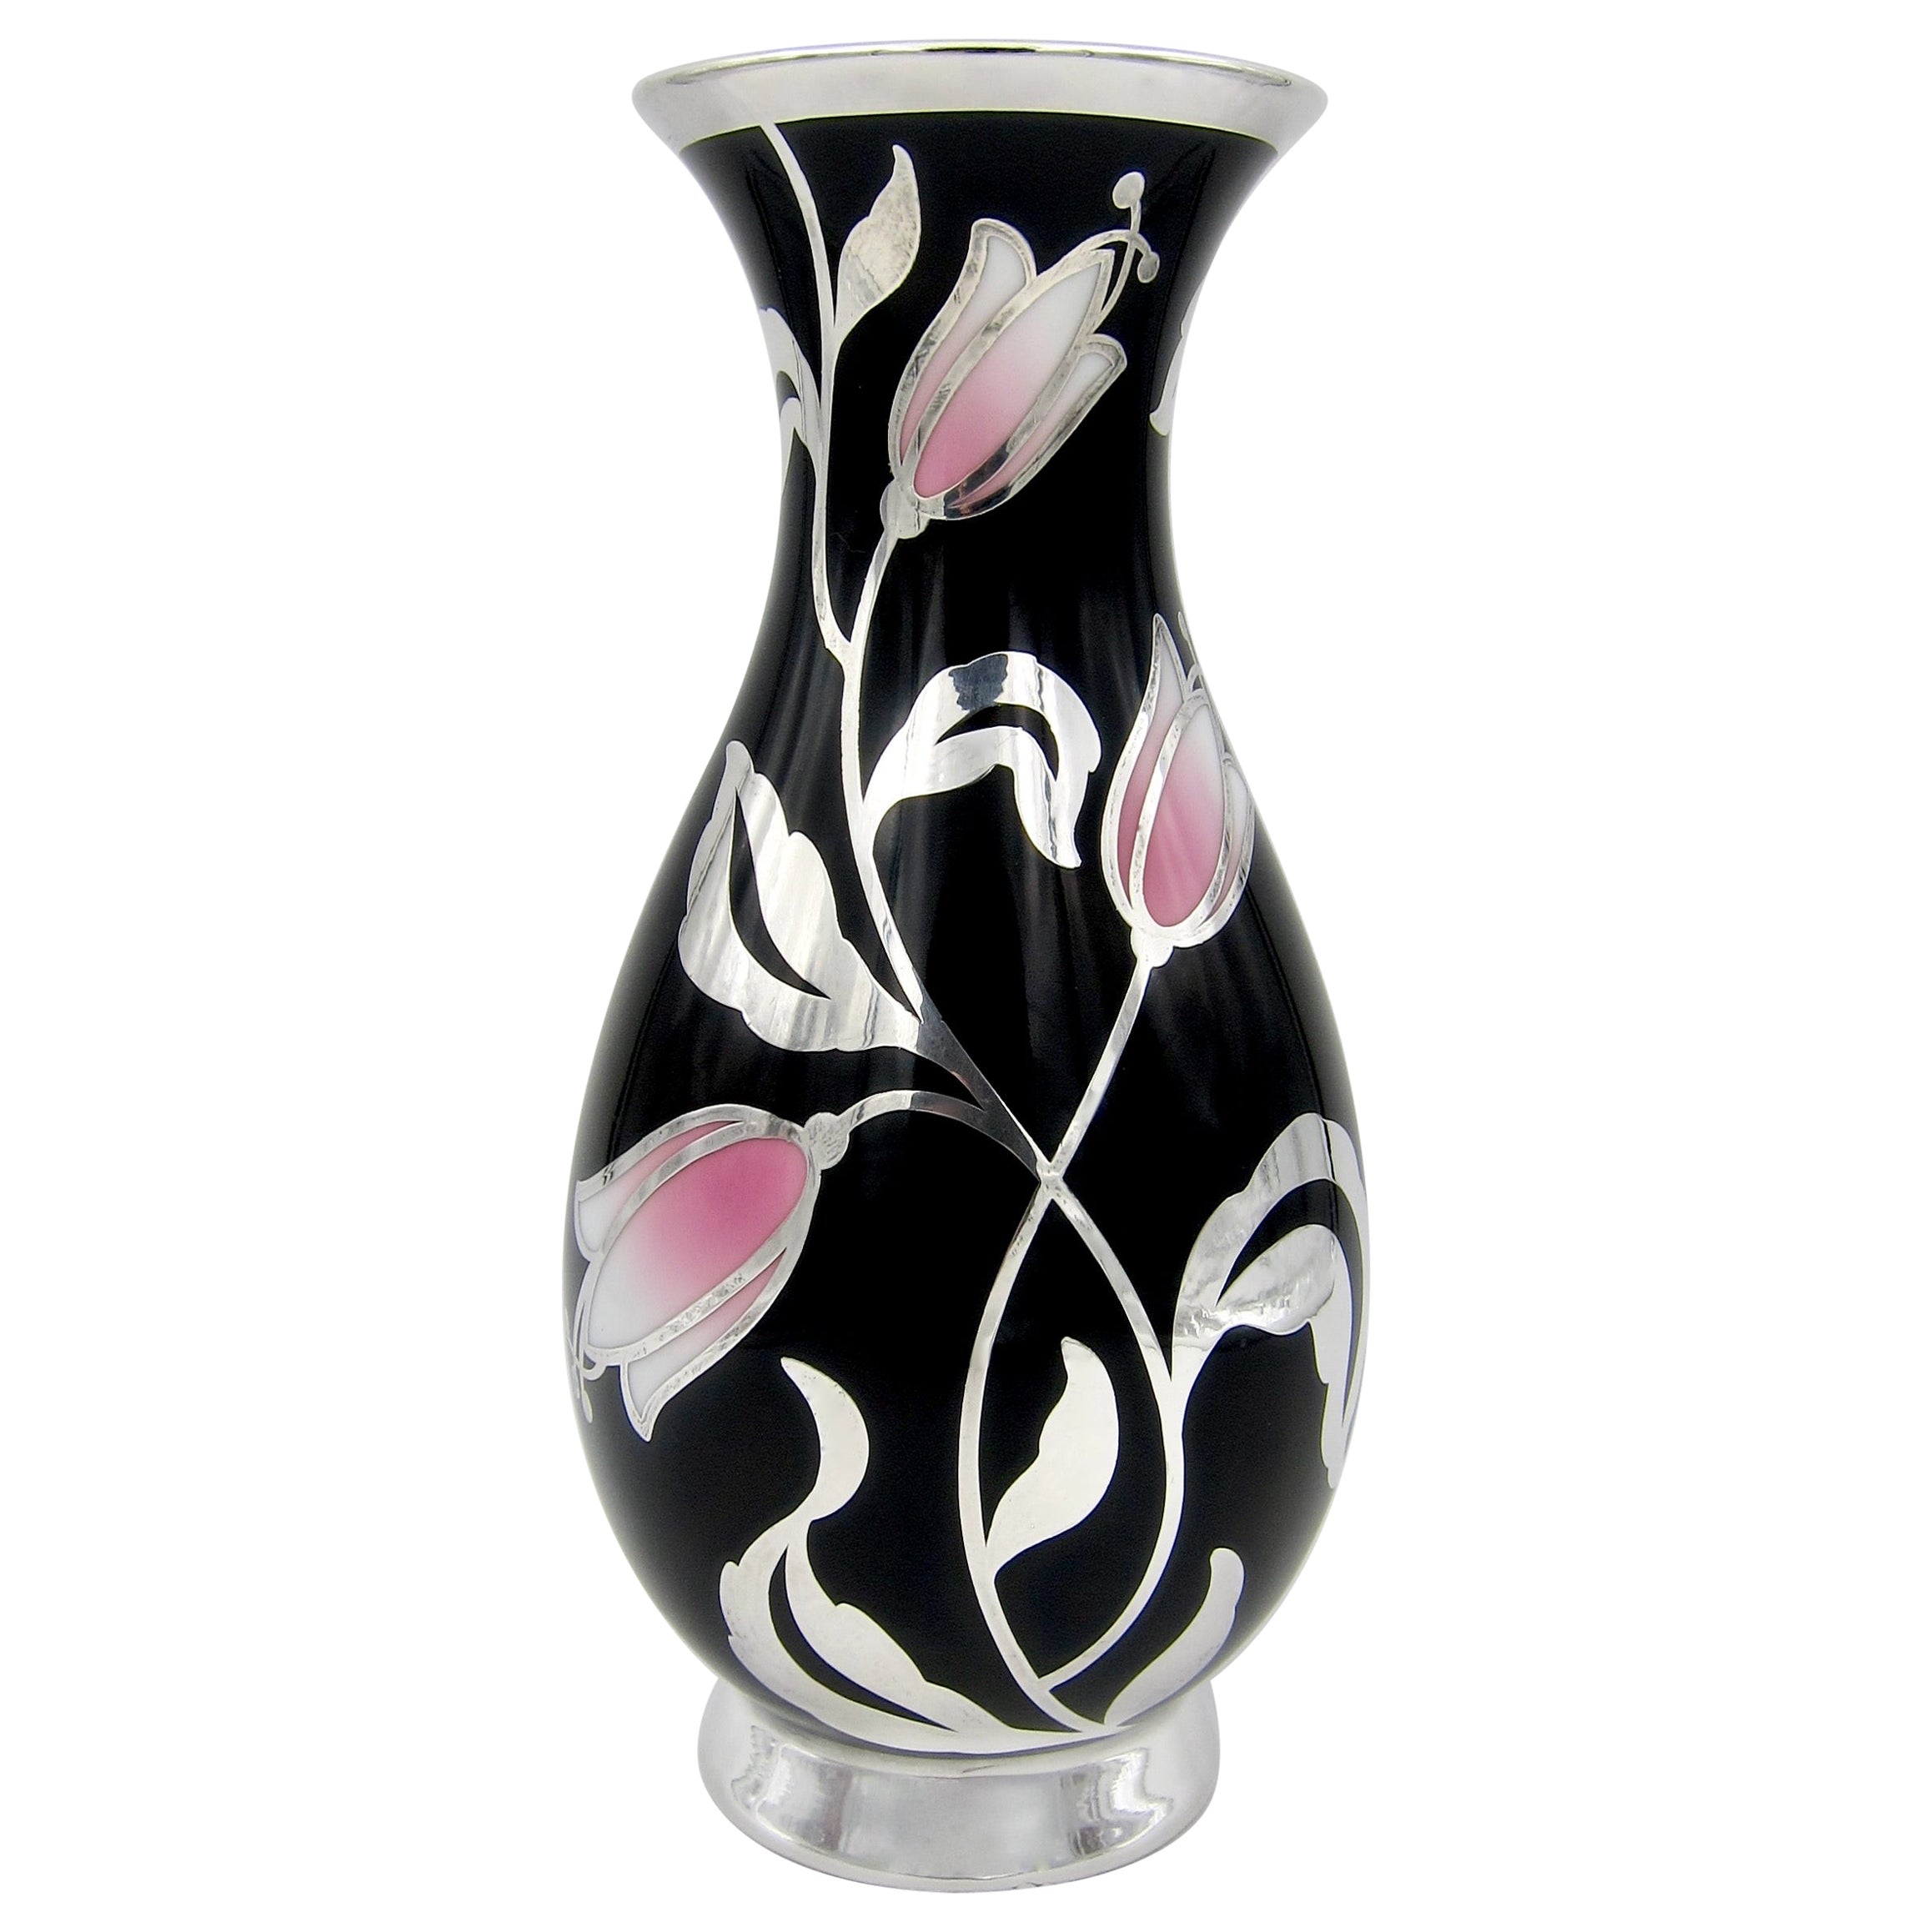 German Porcelain Vase with Spahr Pure Silver Overlay and Pink Tulips